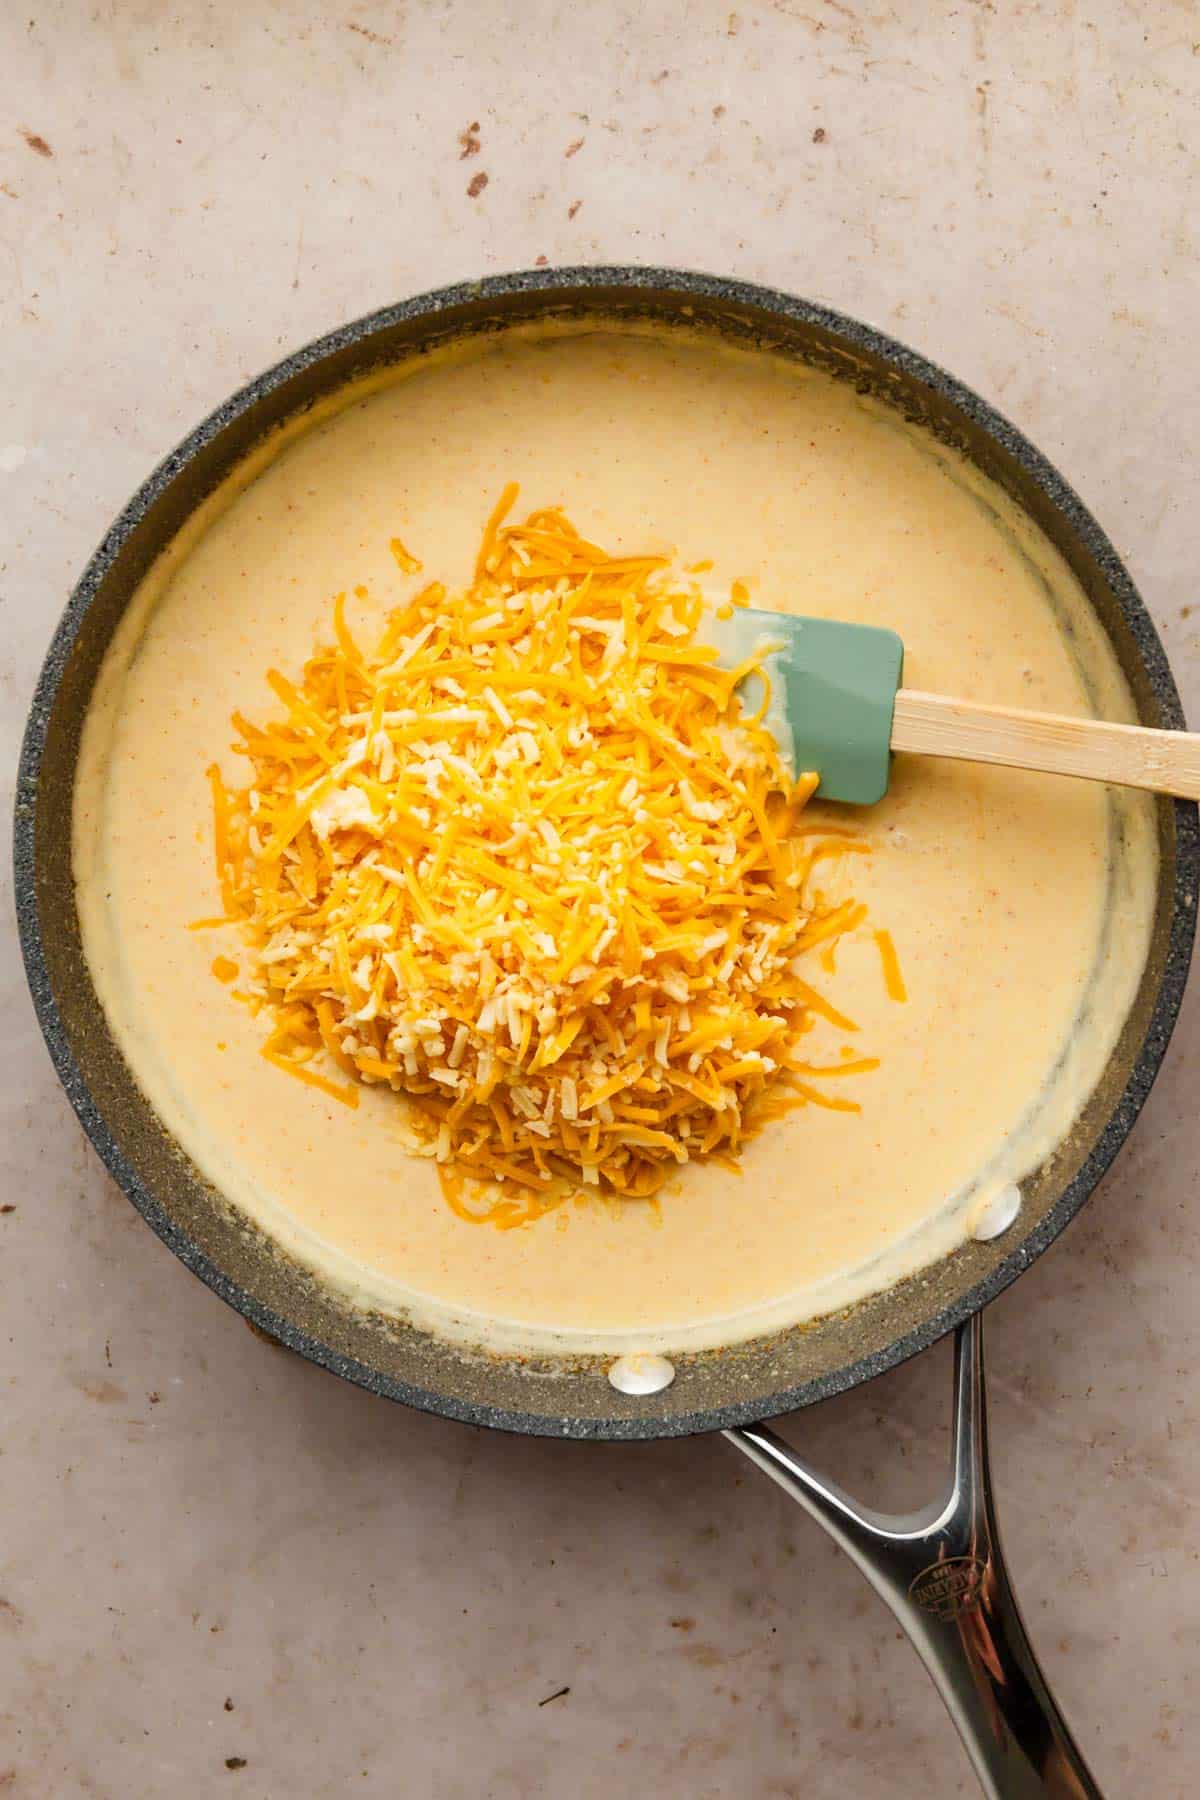 grated cheese added to creamy sauce.